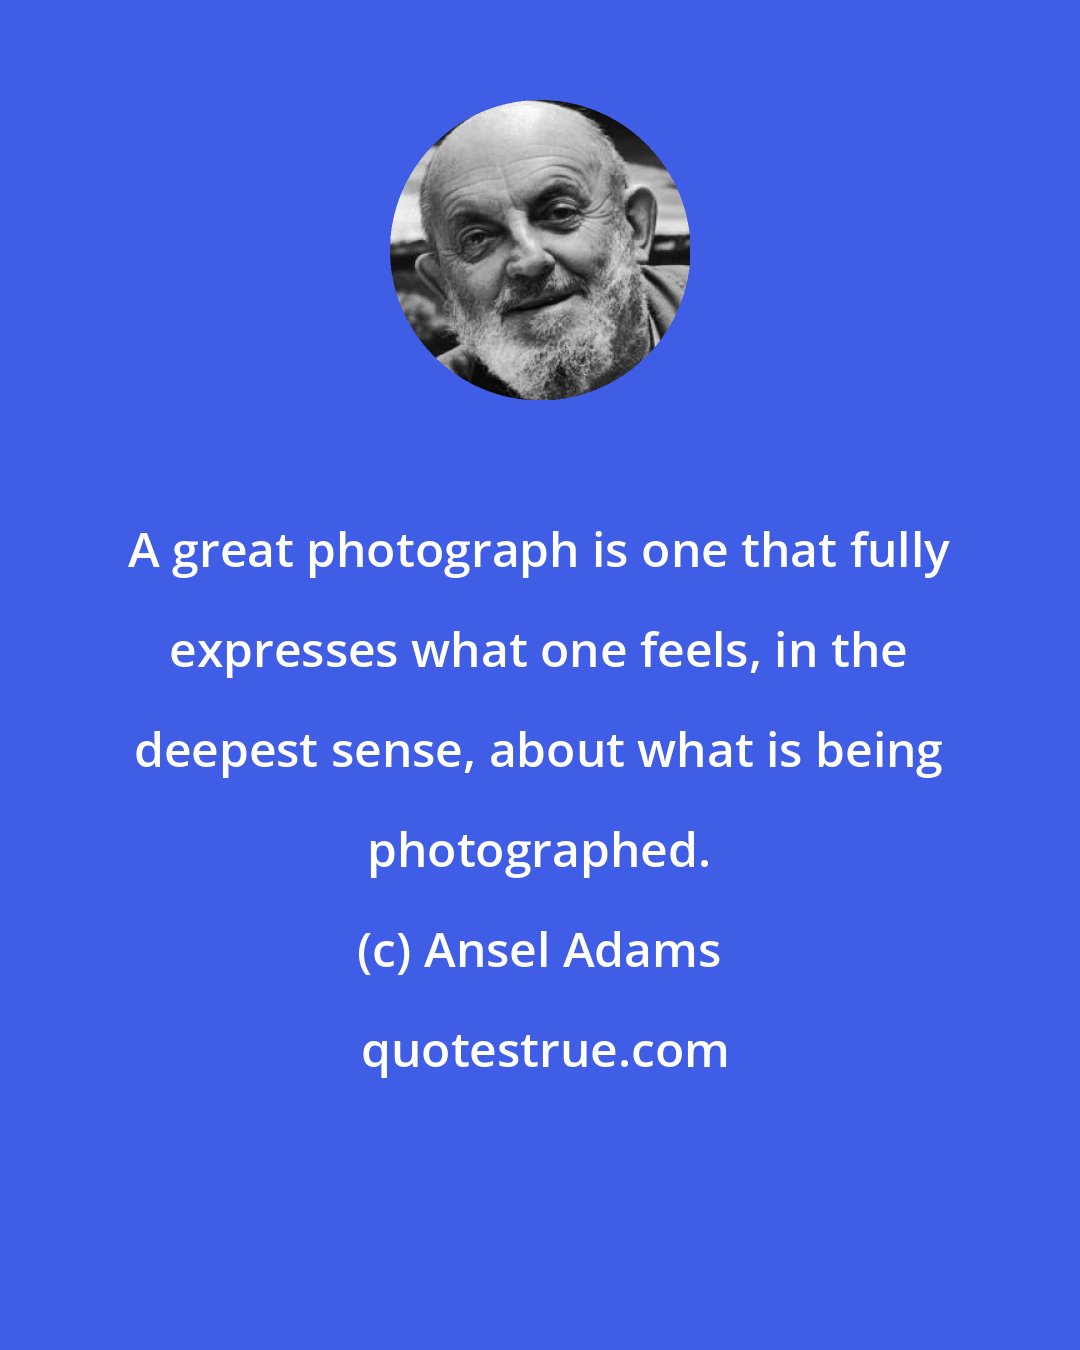 Ansel Adams: A great photograph is one that fully expresses what one feels, in the deepest sense, about what is being photographed.